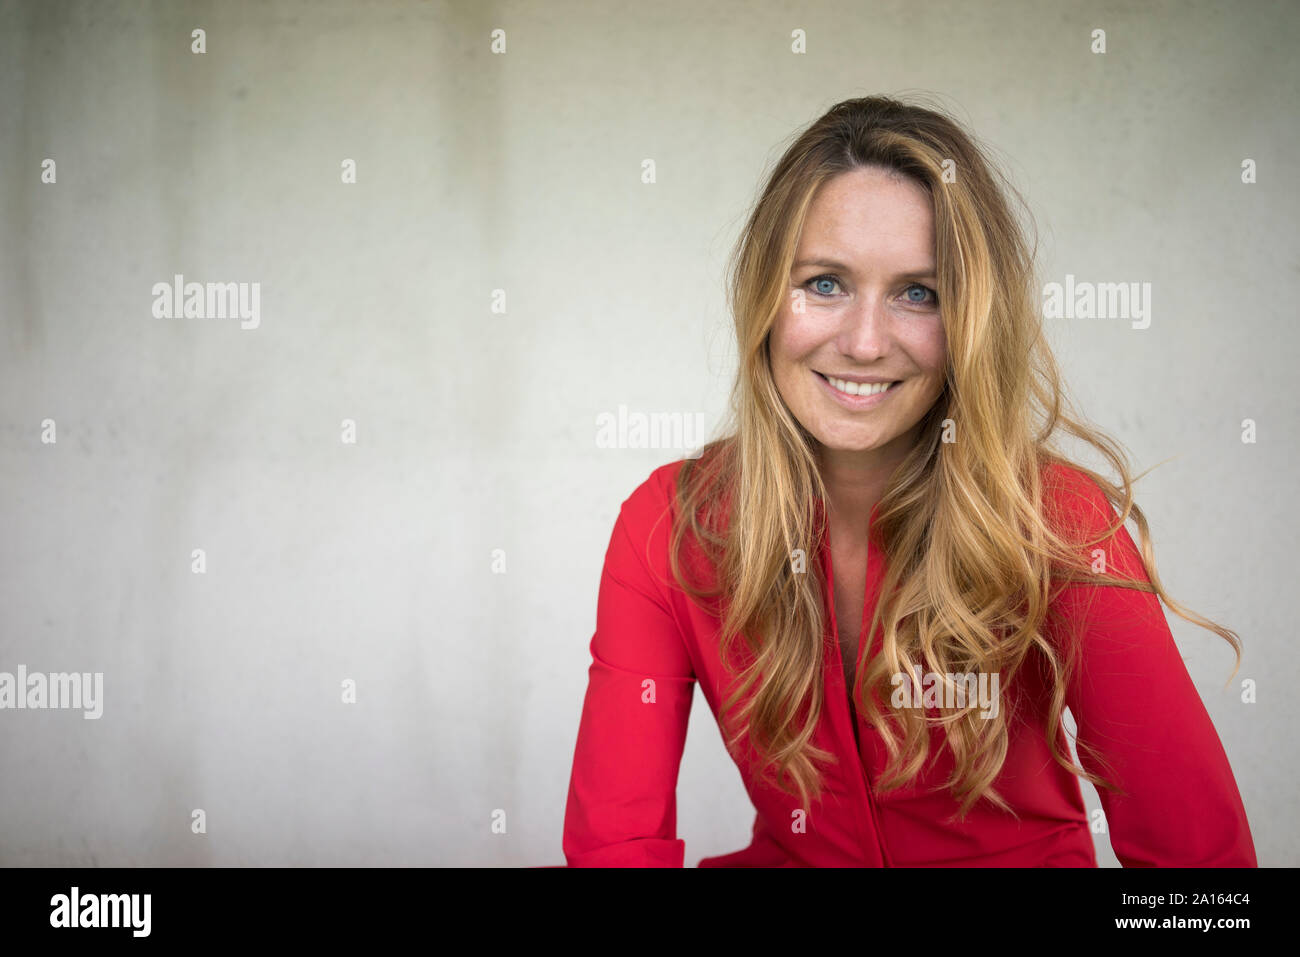 Portrait of smiling woman wearing red jumpsuit Stock Photo